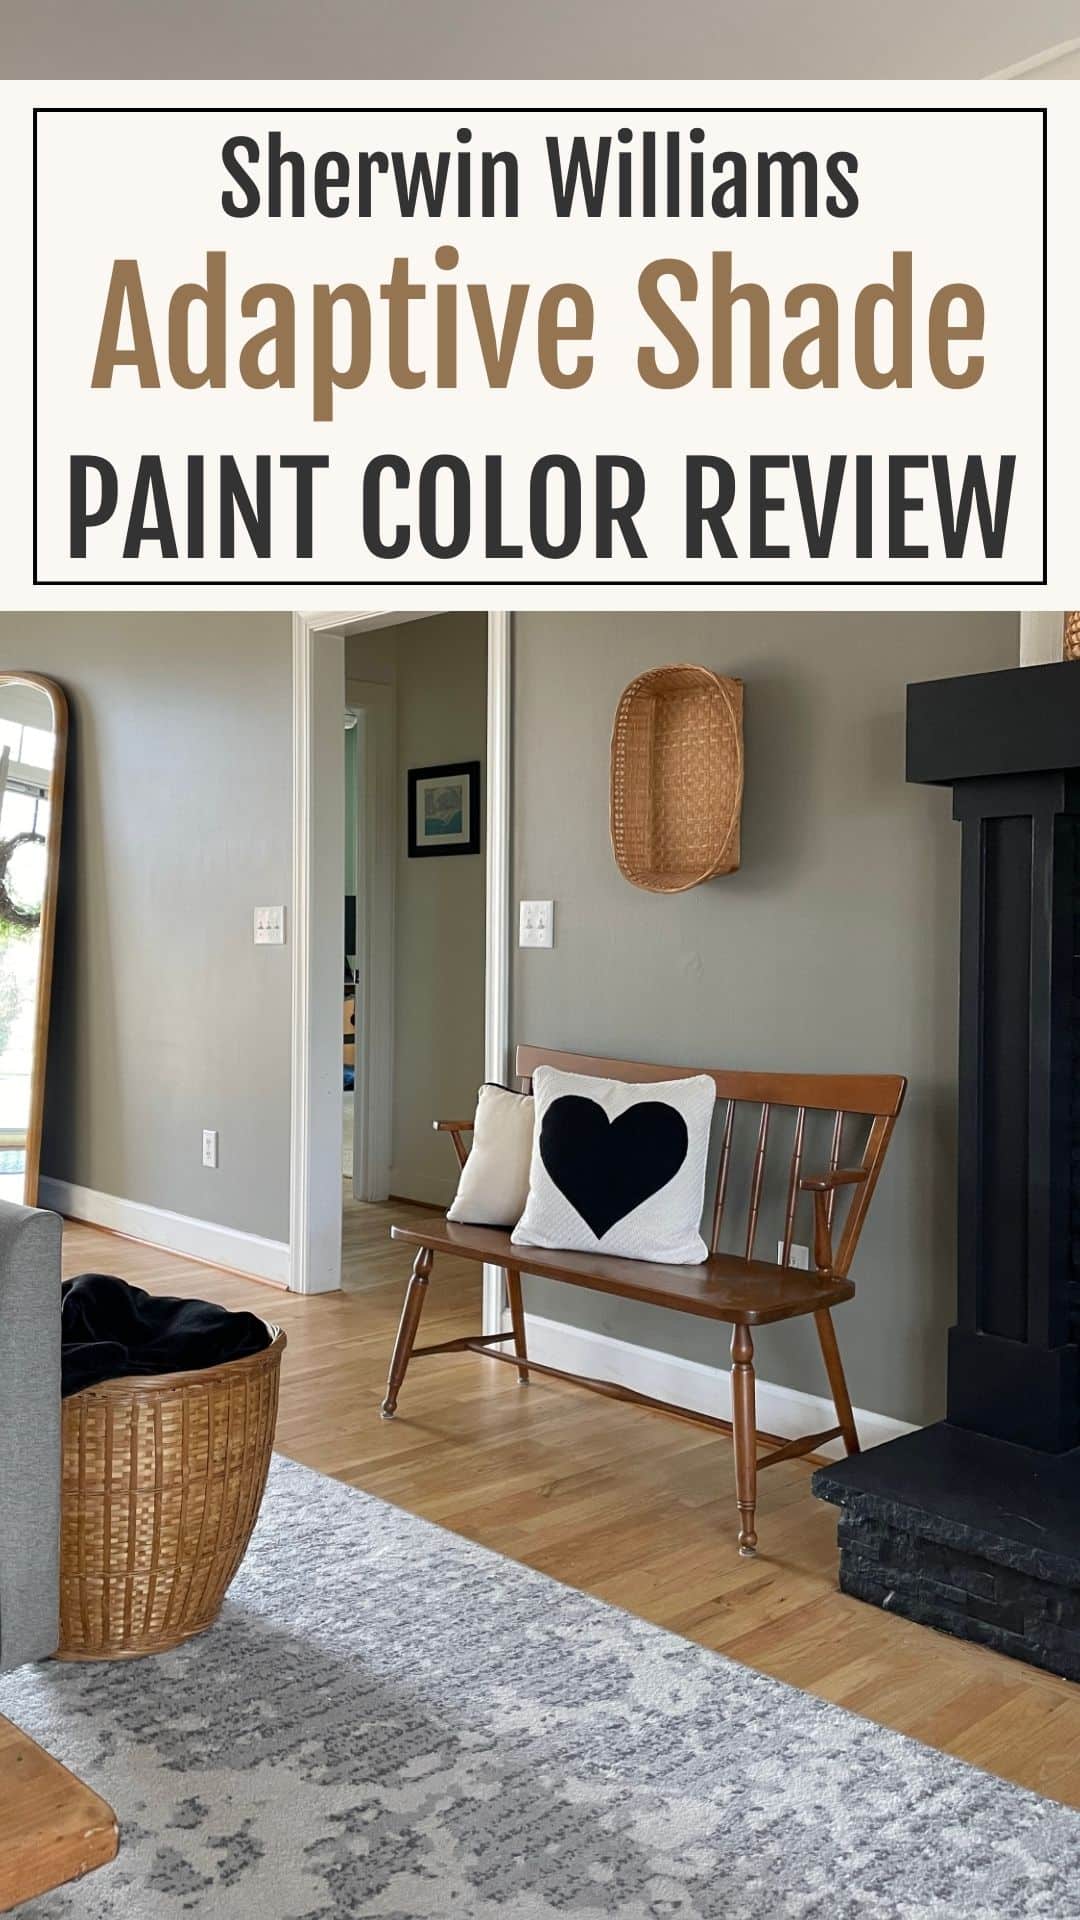 living room walls painted in Adaptive shade paint color